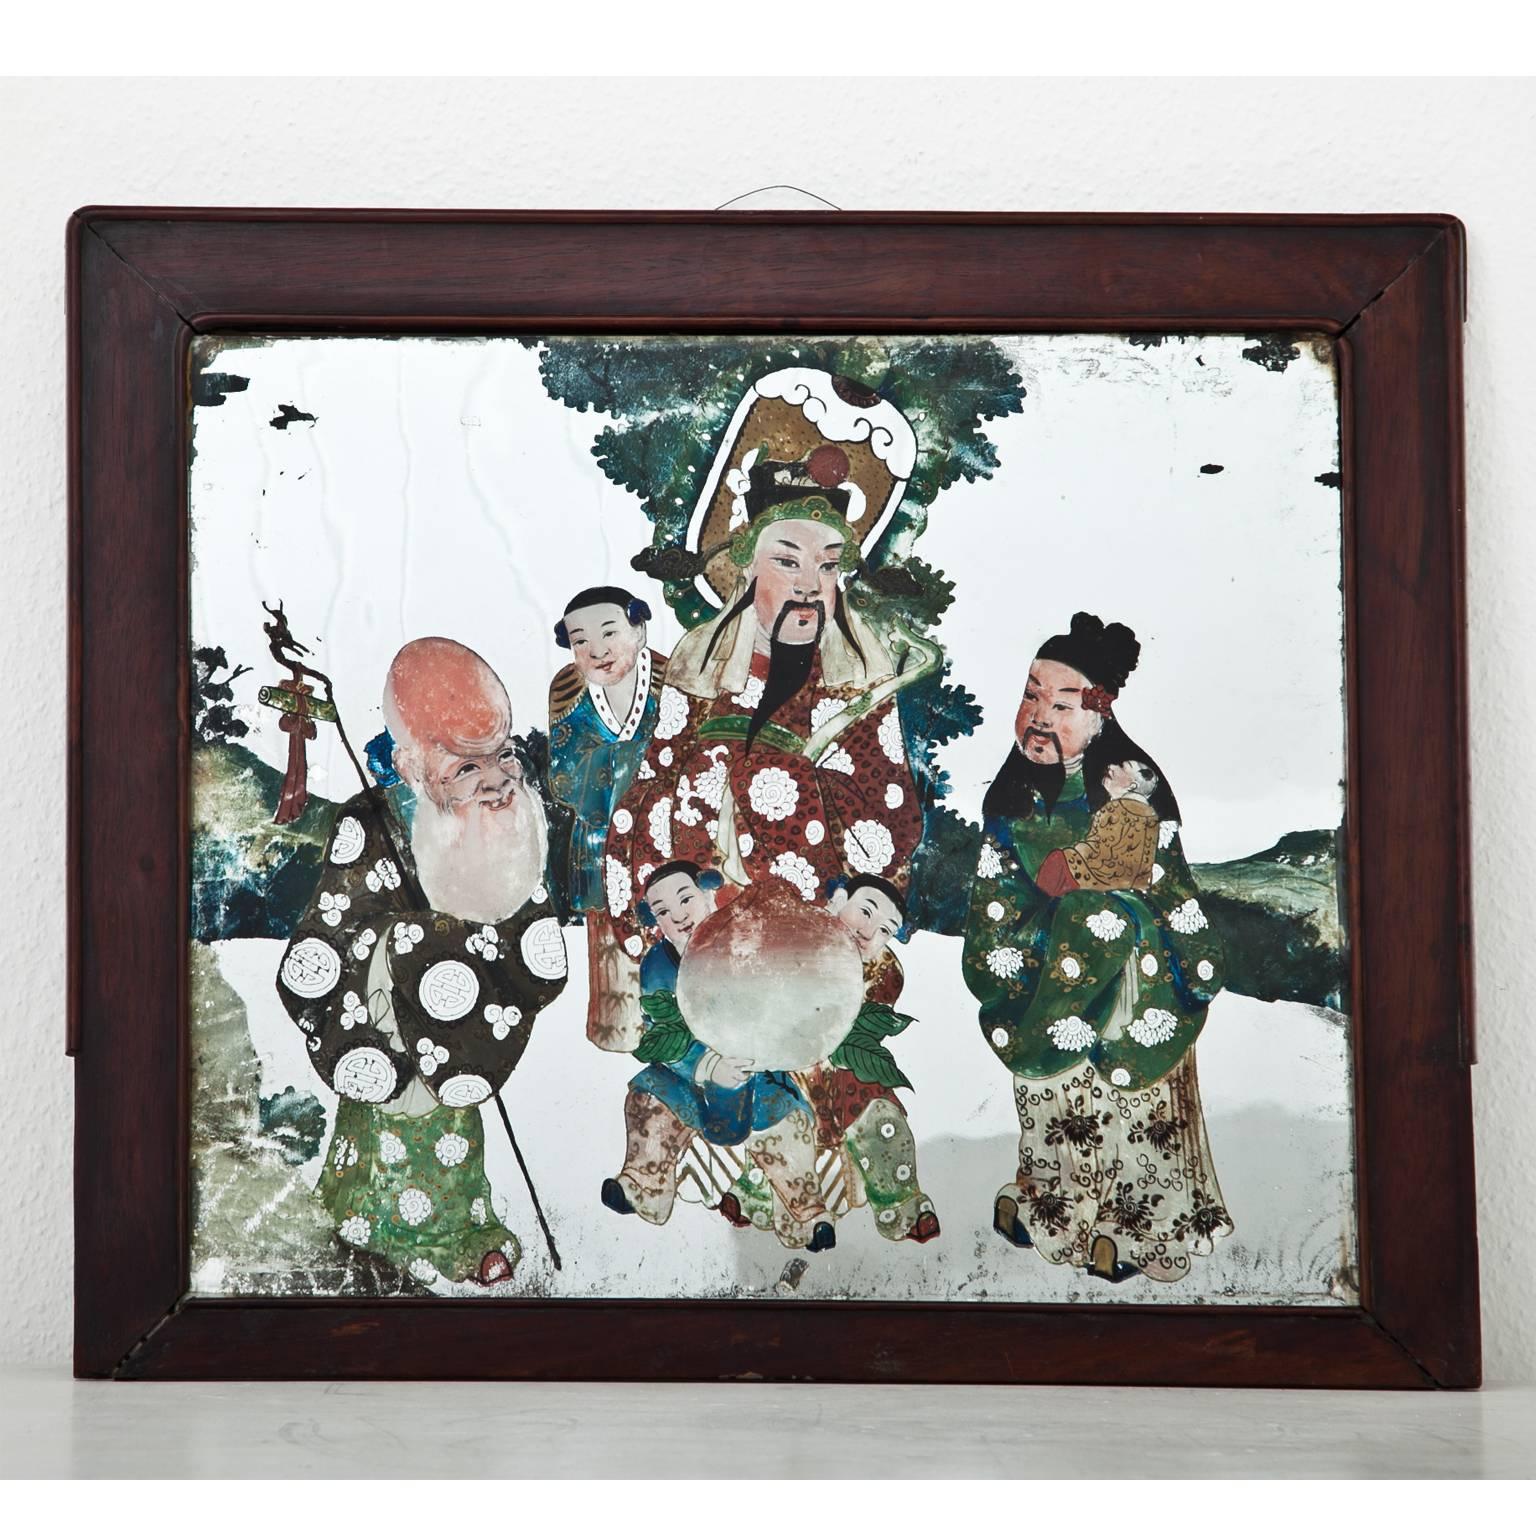 Chinese reverse glass painting, depicting an emperor surrounded by a sage, his servant and three boys. Size without frame: 39 x 40 cm.